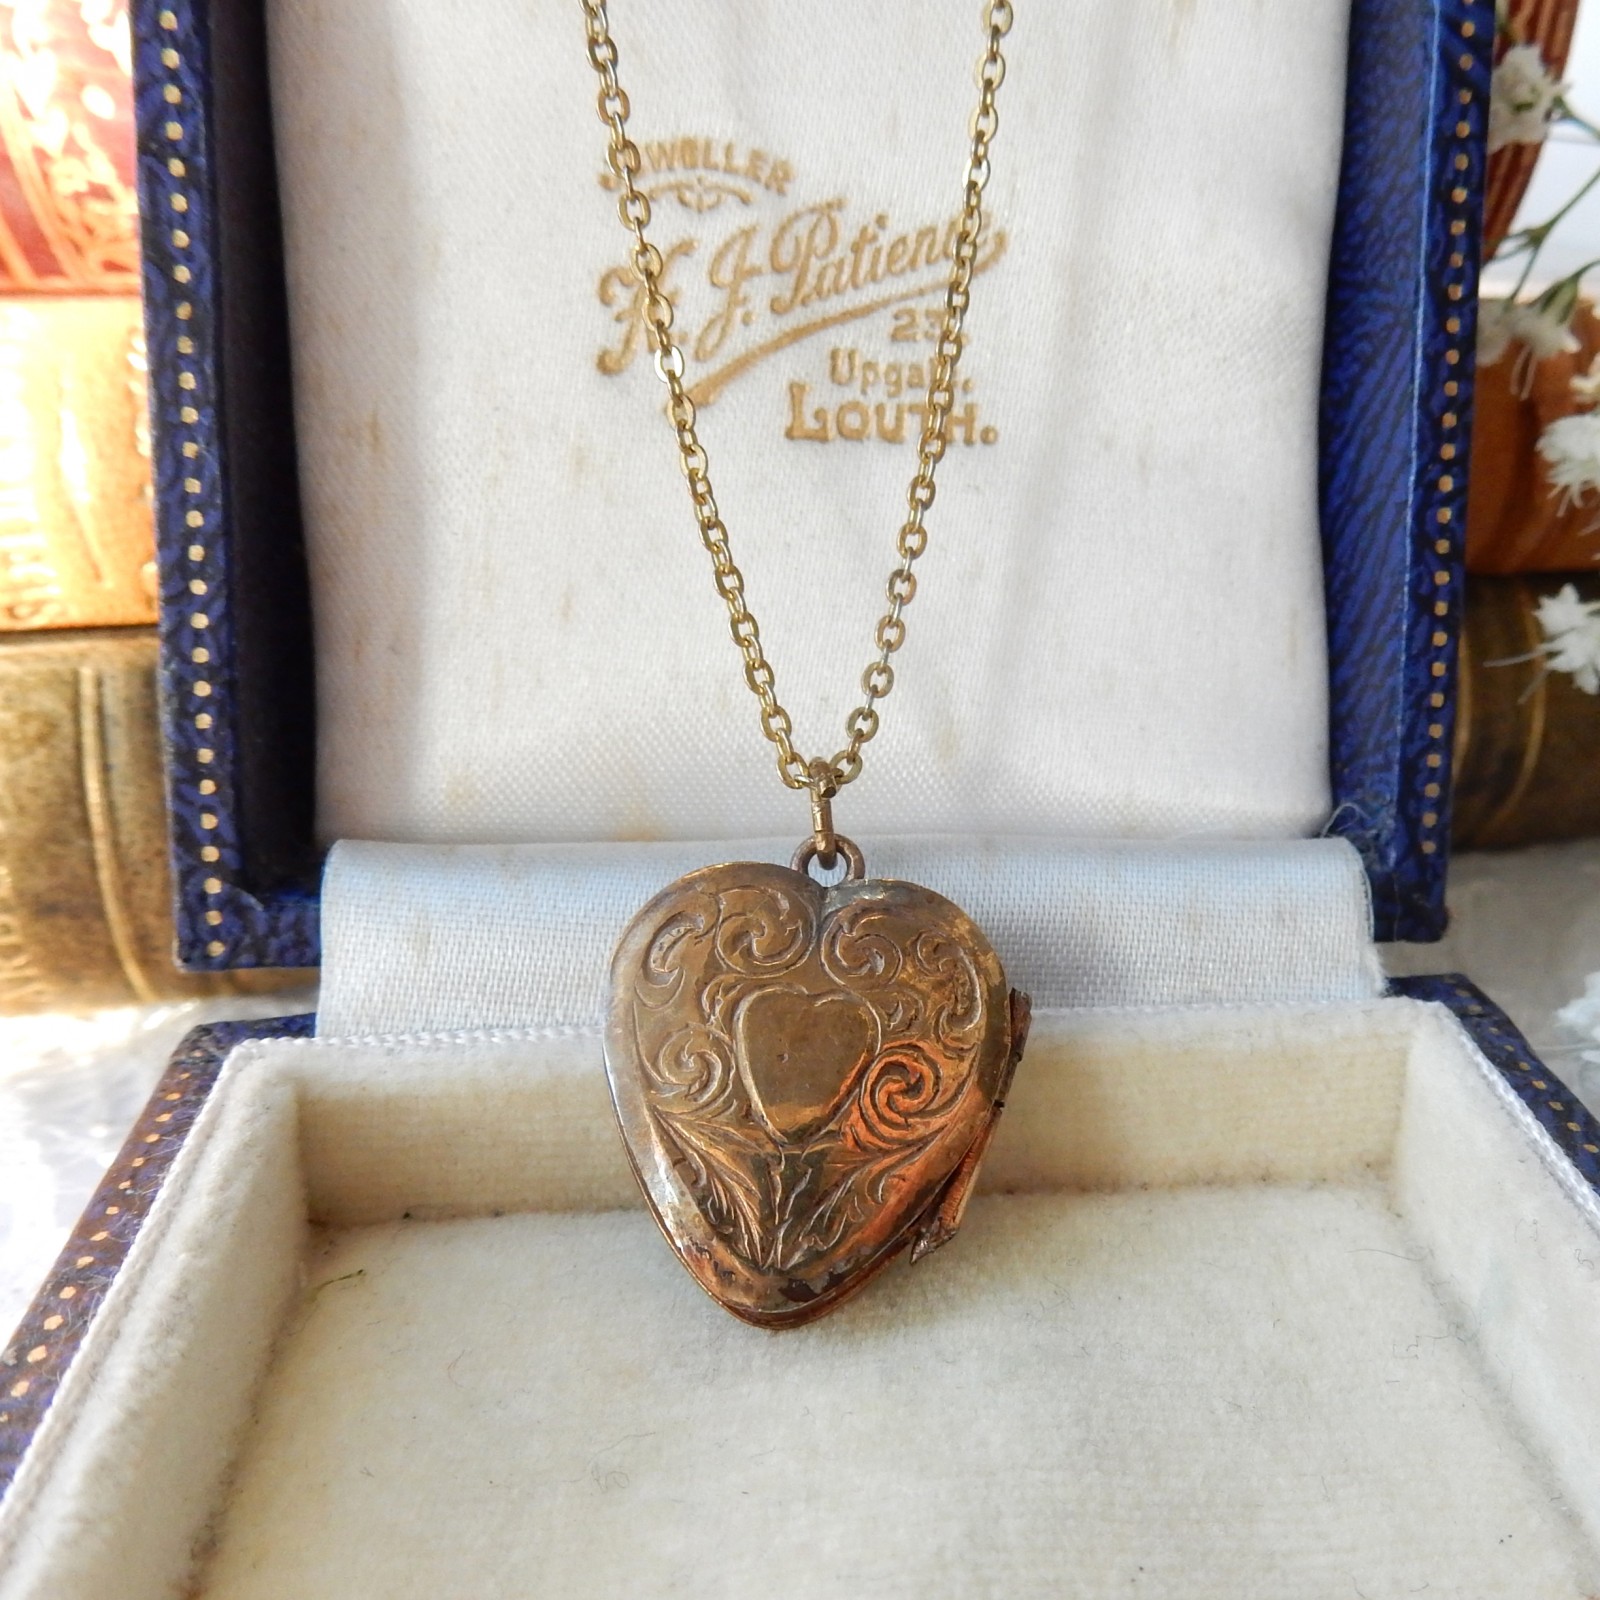 Victorian Revival Engraved Cover Locket Necklace 20